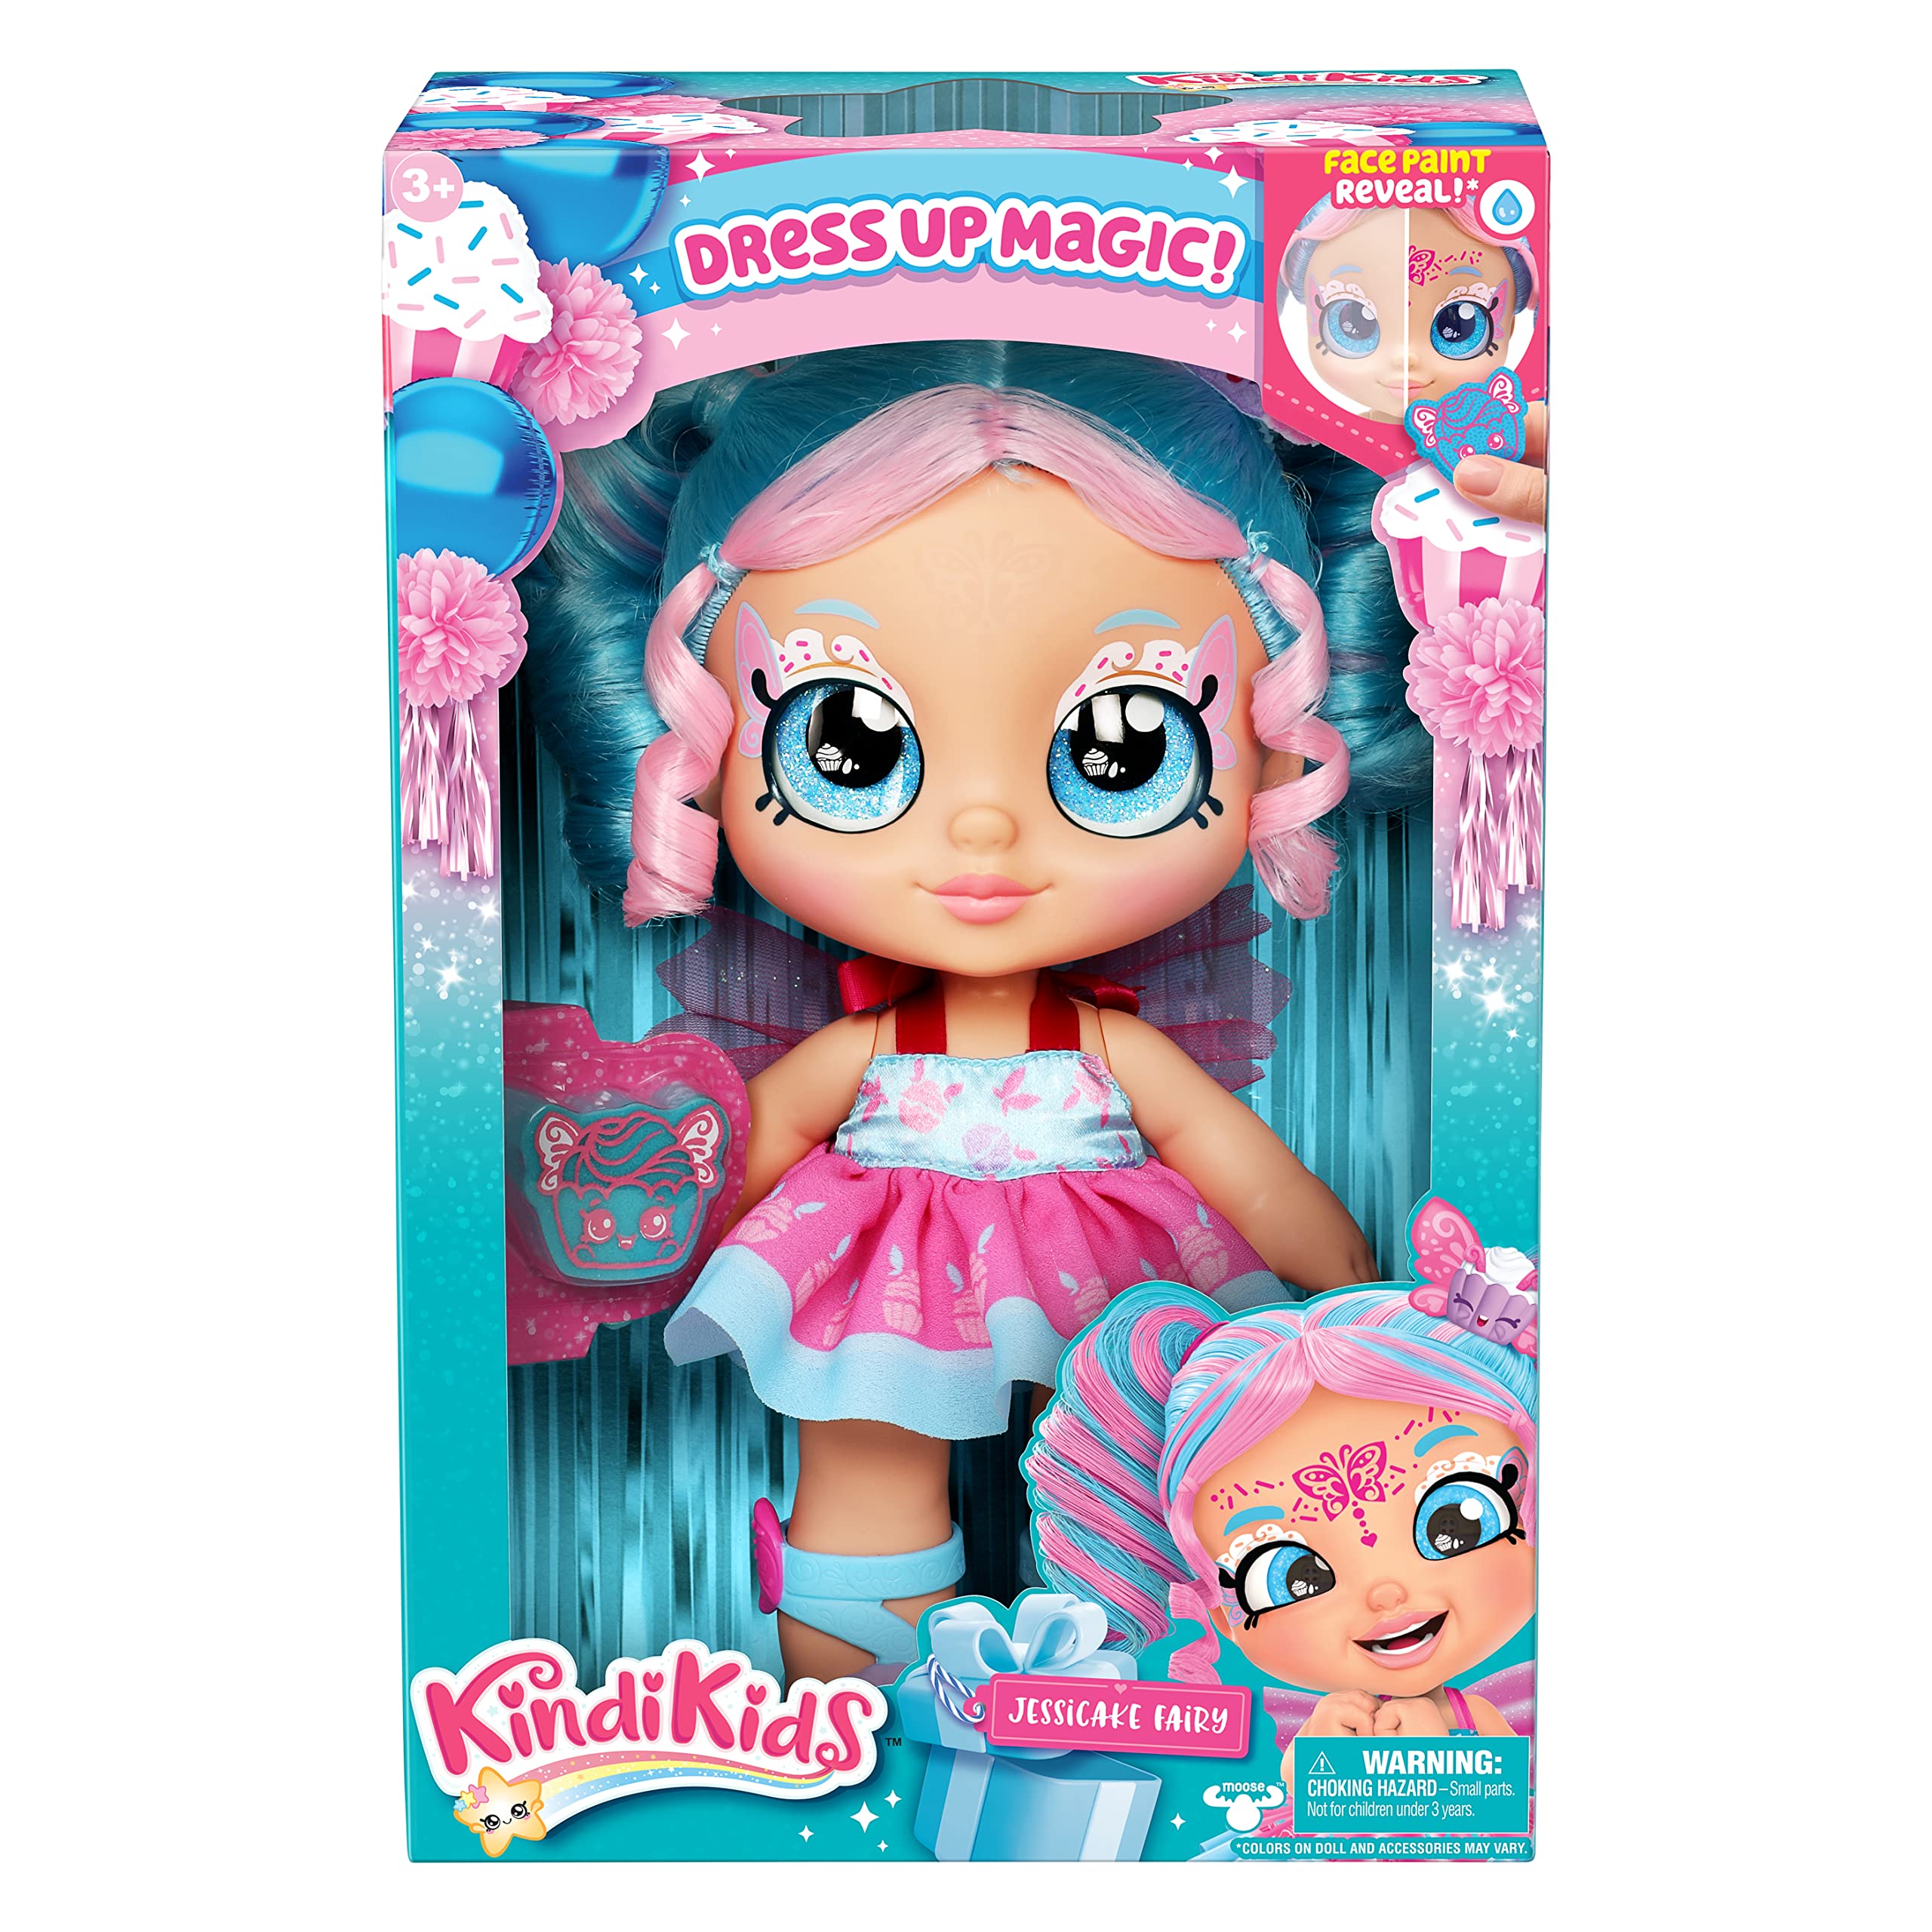 Kindi Kids 50243 Dress Jessicake Fairy Toddler face Paint Reveal, 1 Doll with Magic Sponge, Big Glittery Eyes, Changeable Clothes and Removable Shoes